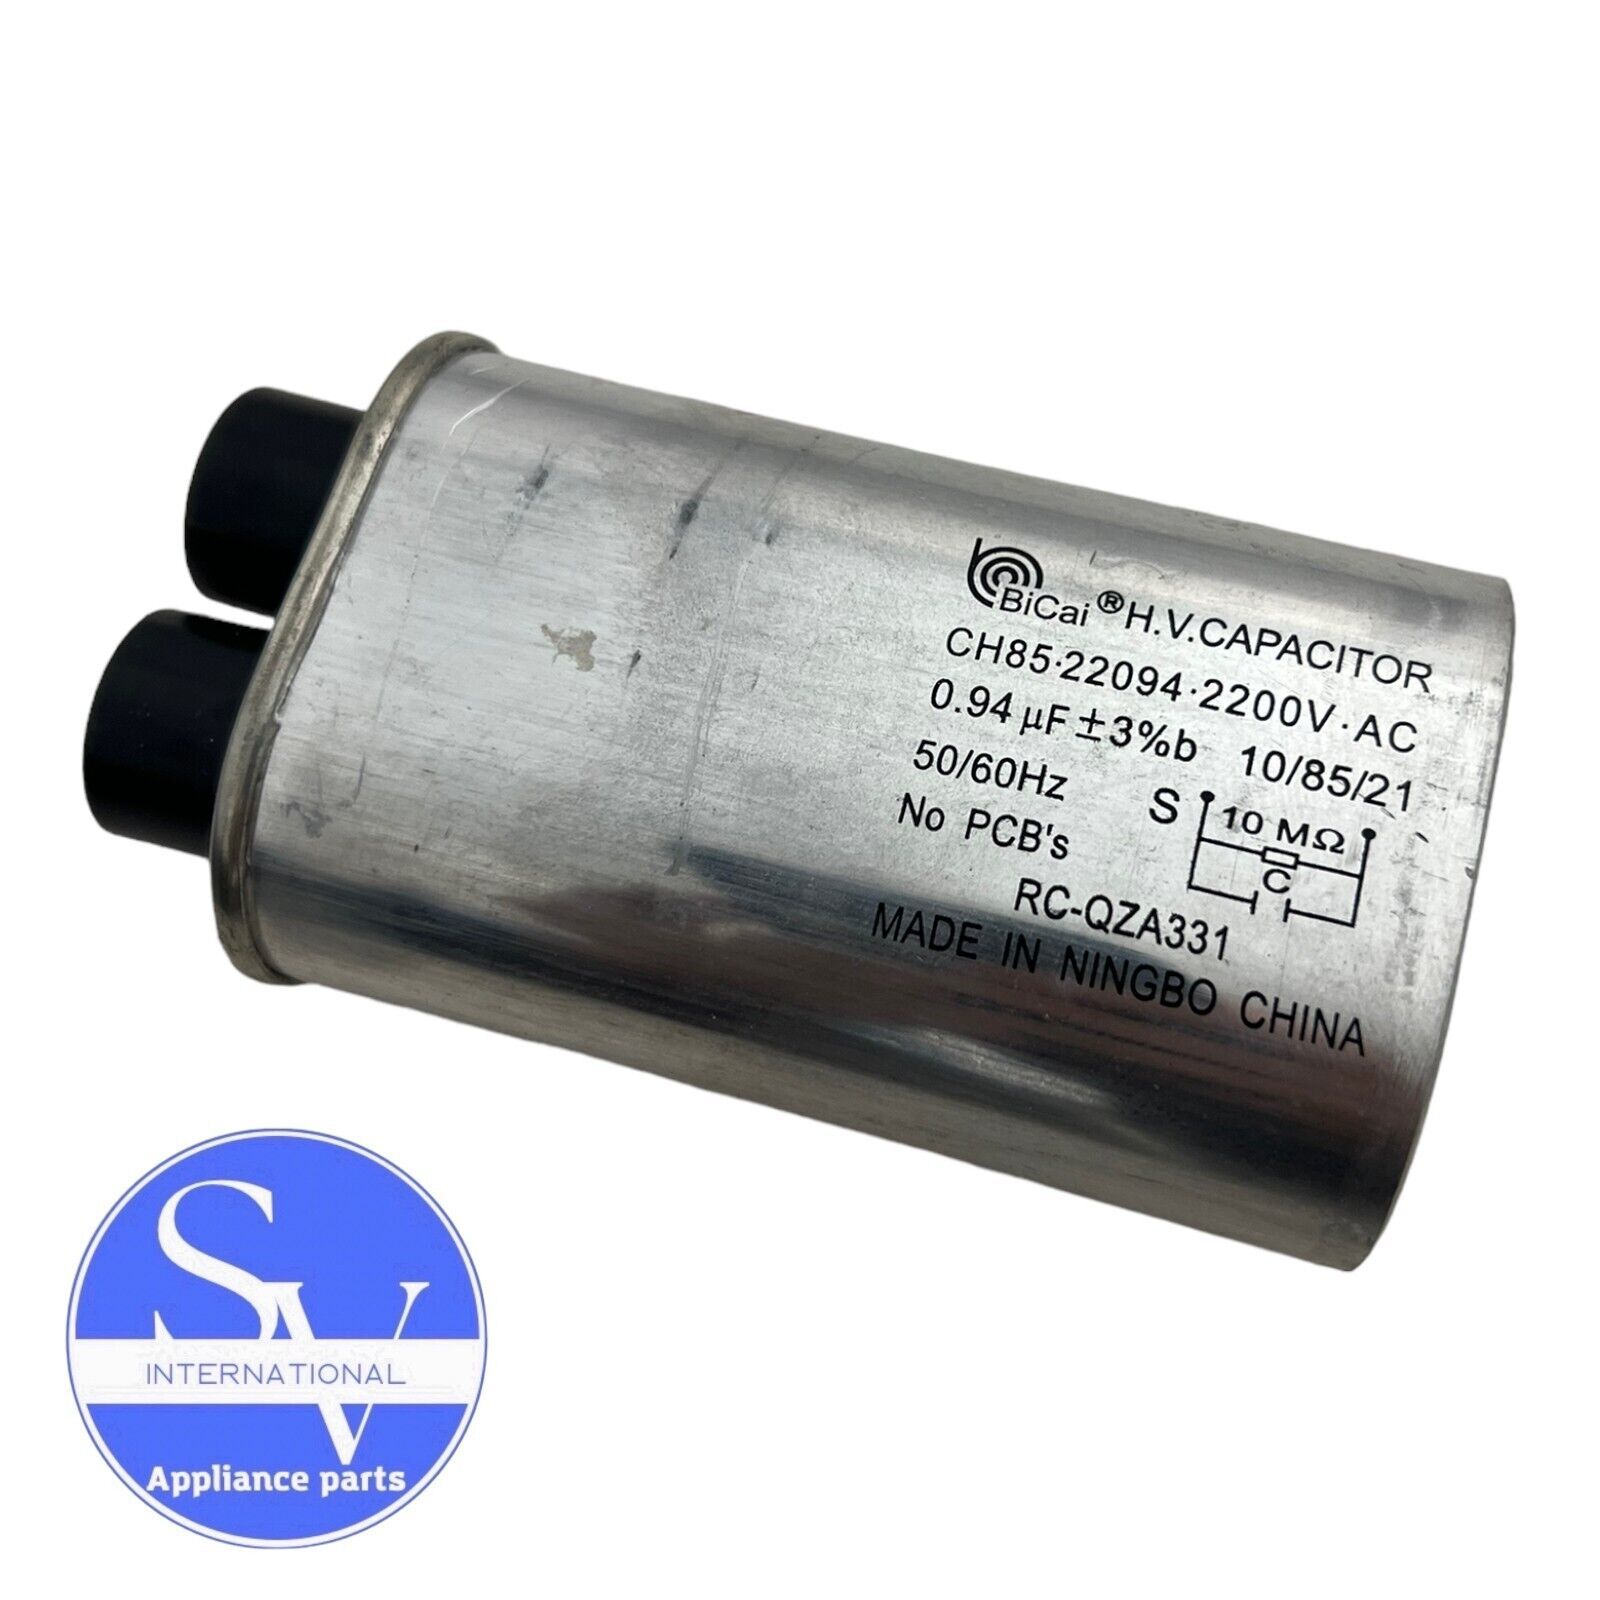 Primary image for Electrolux Frigidaire Microwave Capacitor 5304470539